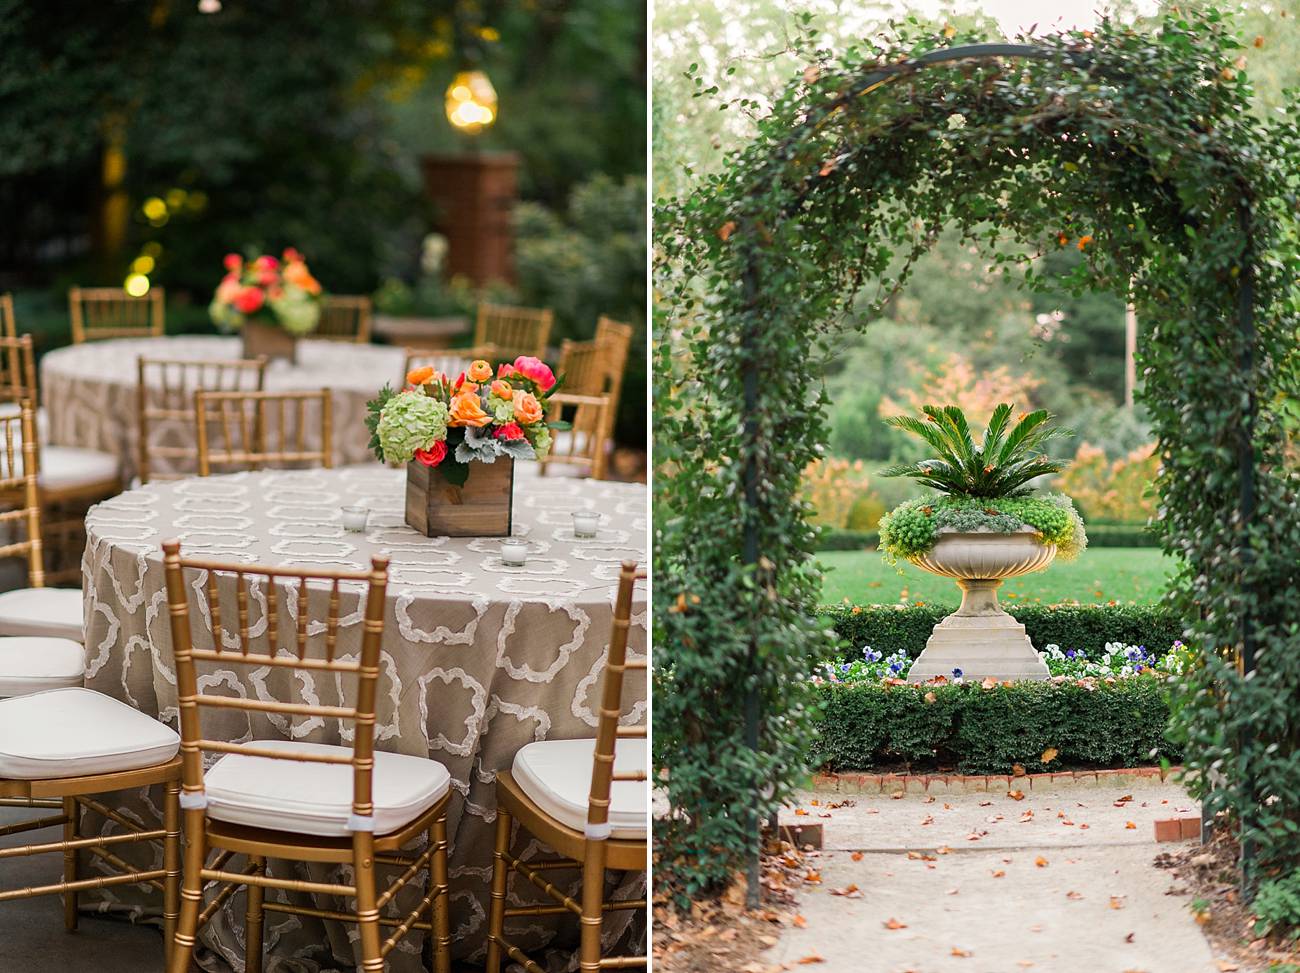 Topiaries and table settings at the Duke Mansion